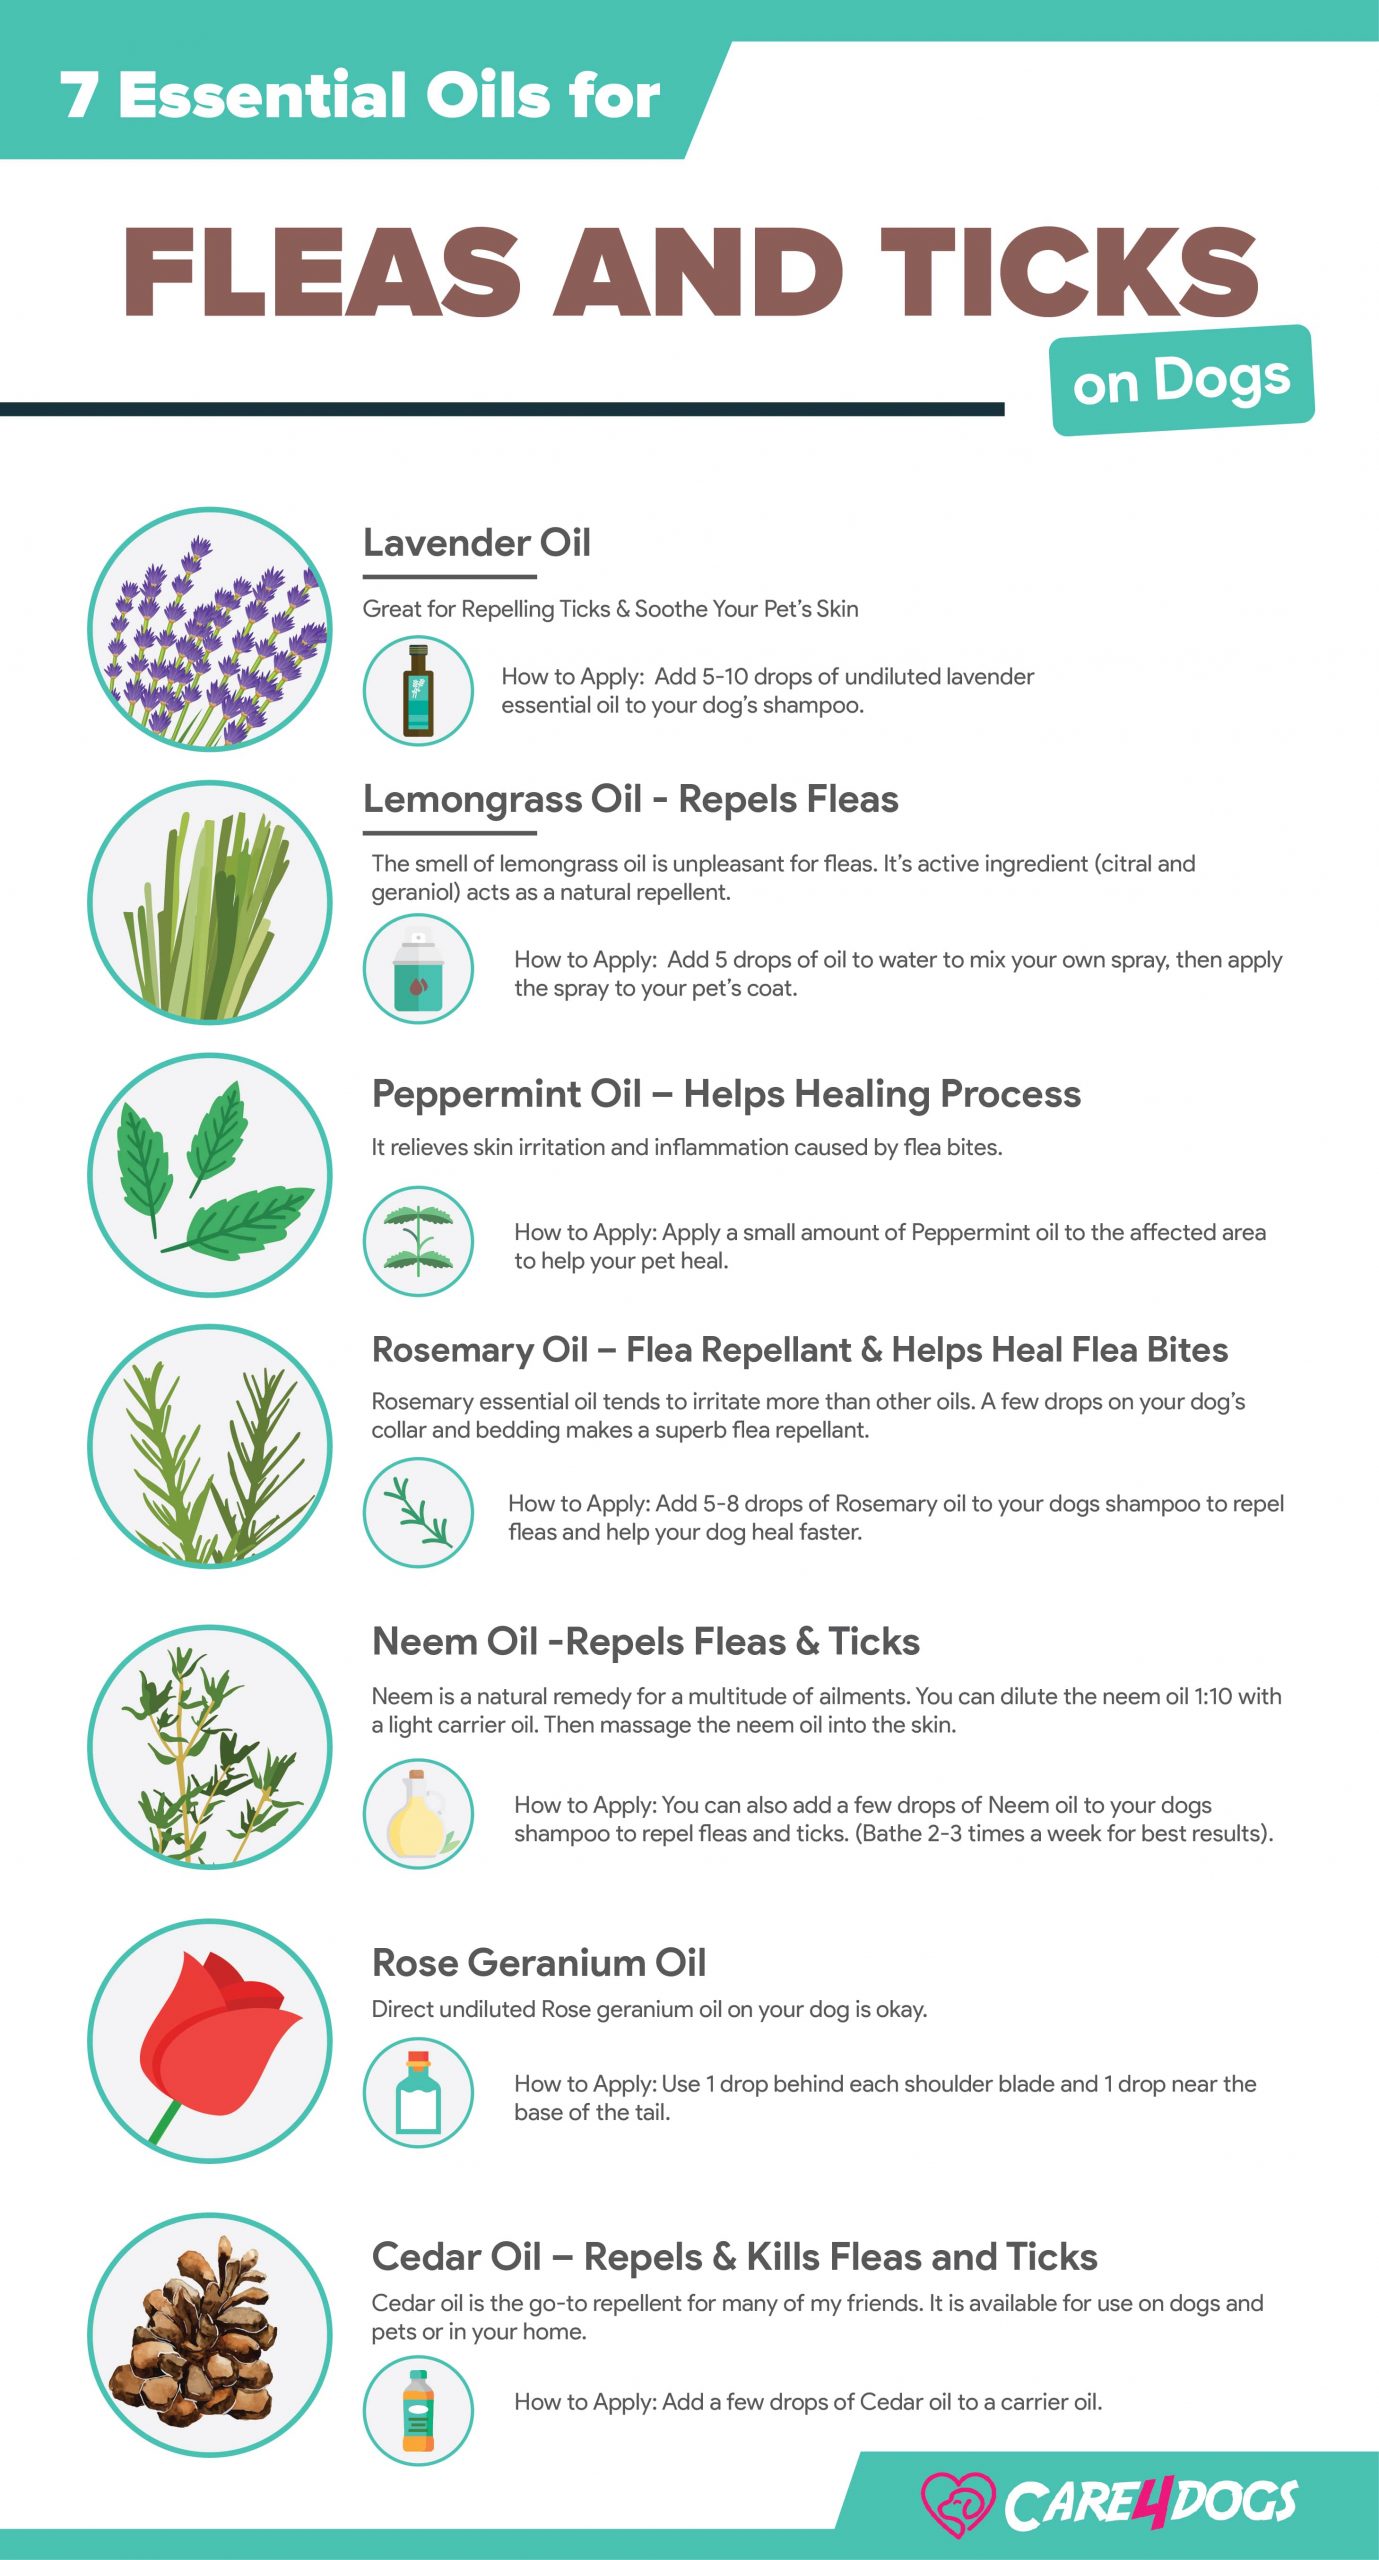 7 Essential Oils For Fleas And Ticks On Dogs 30 Toxic Ones Care4dogs